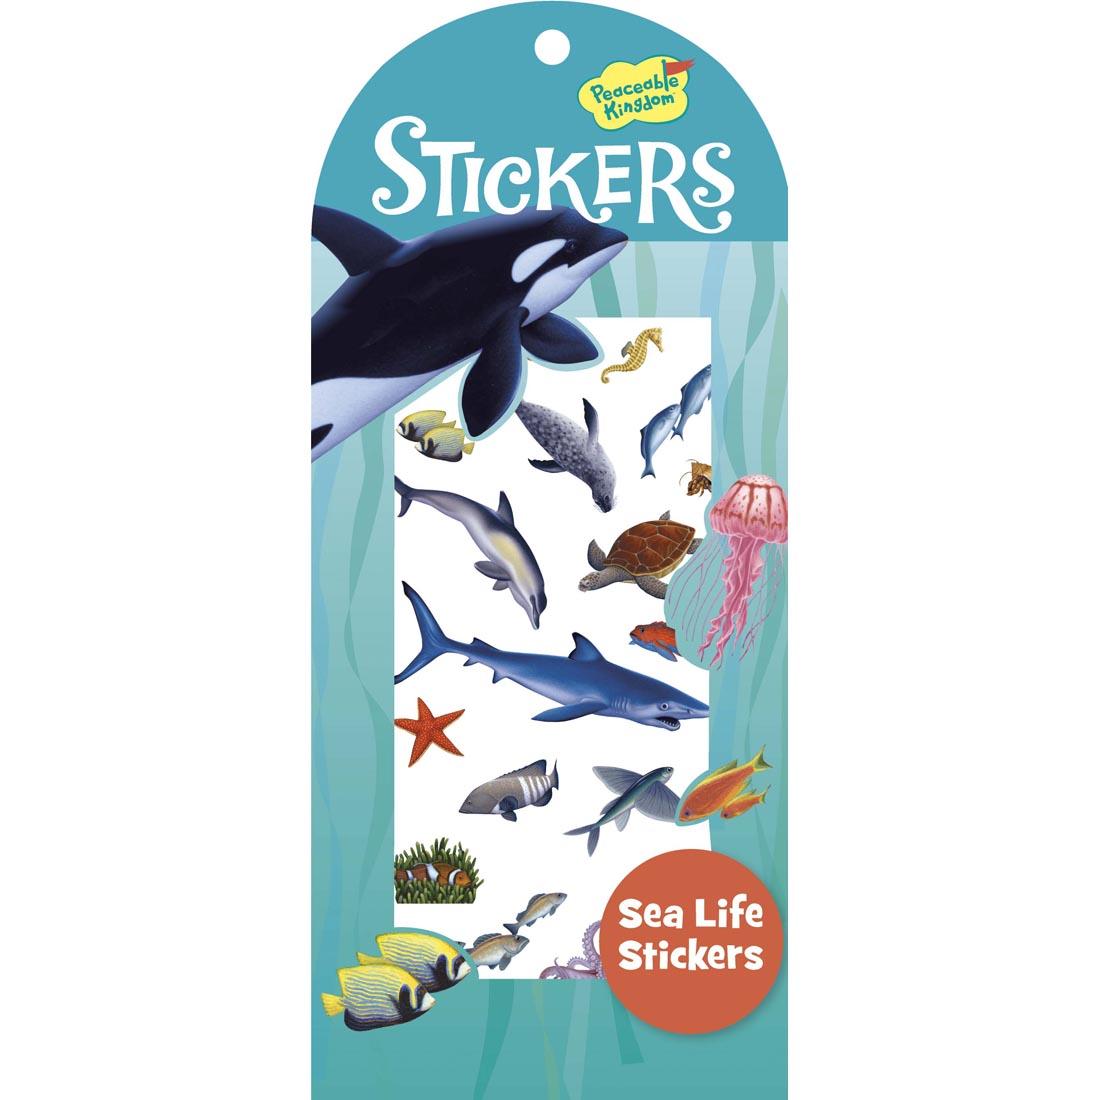 Sea Life Stickers by Peaceable Kingdom